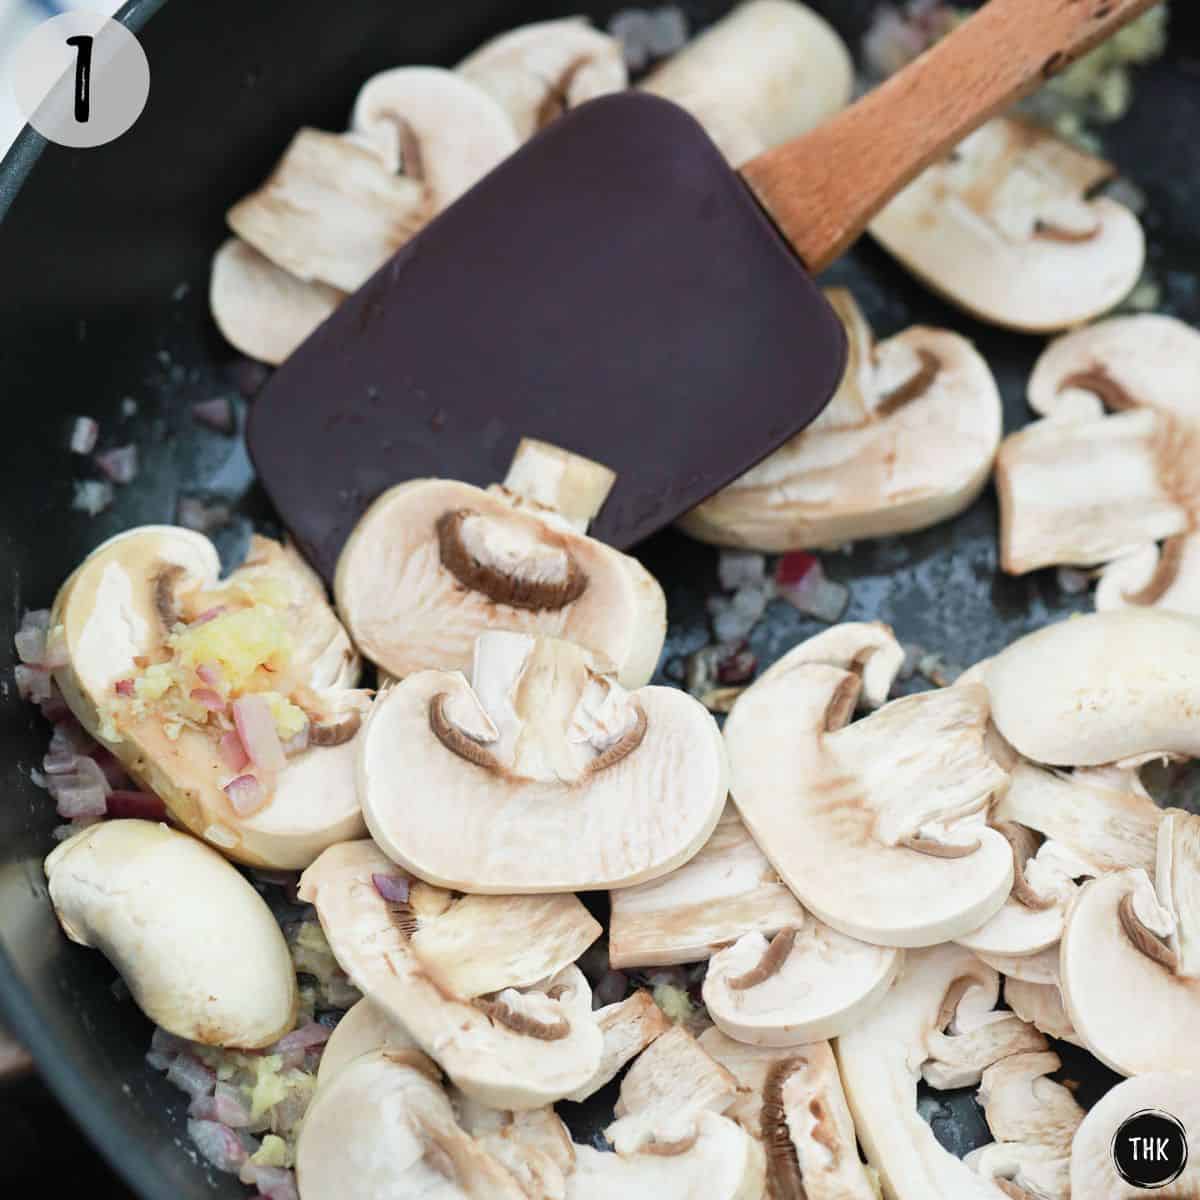 Onion, garlic and mushrooms being sauteed in pan.